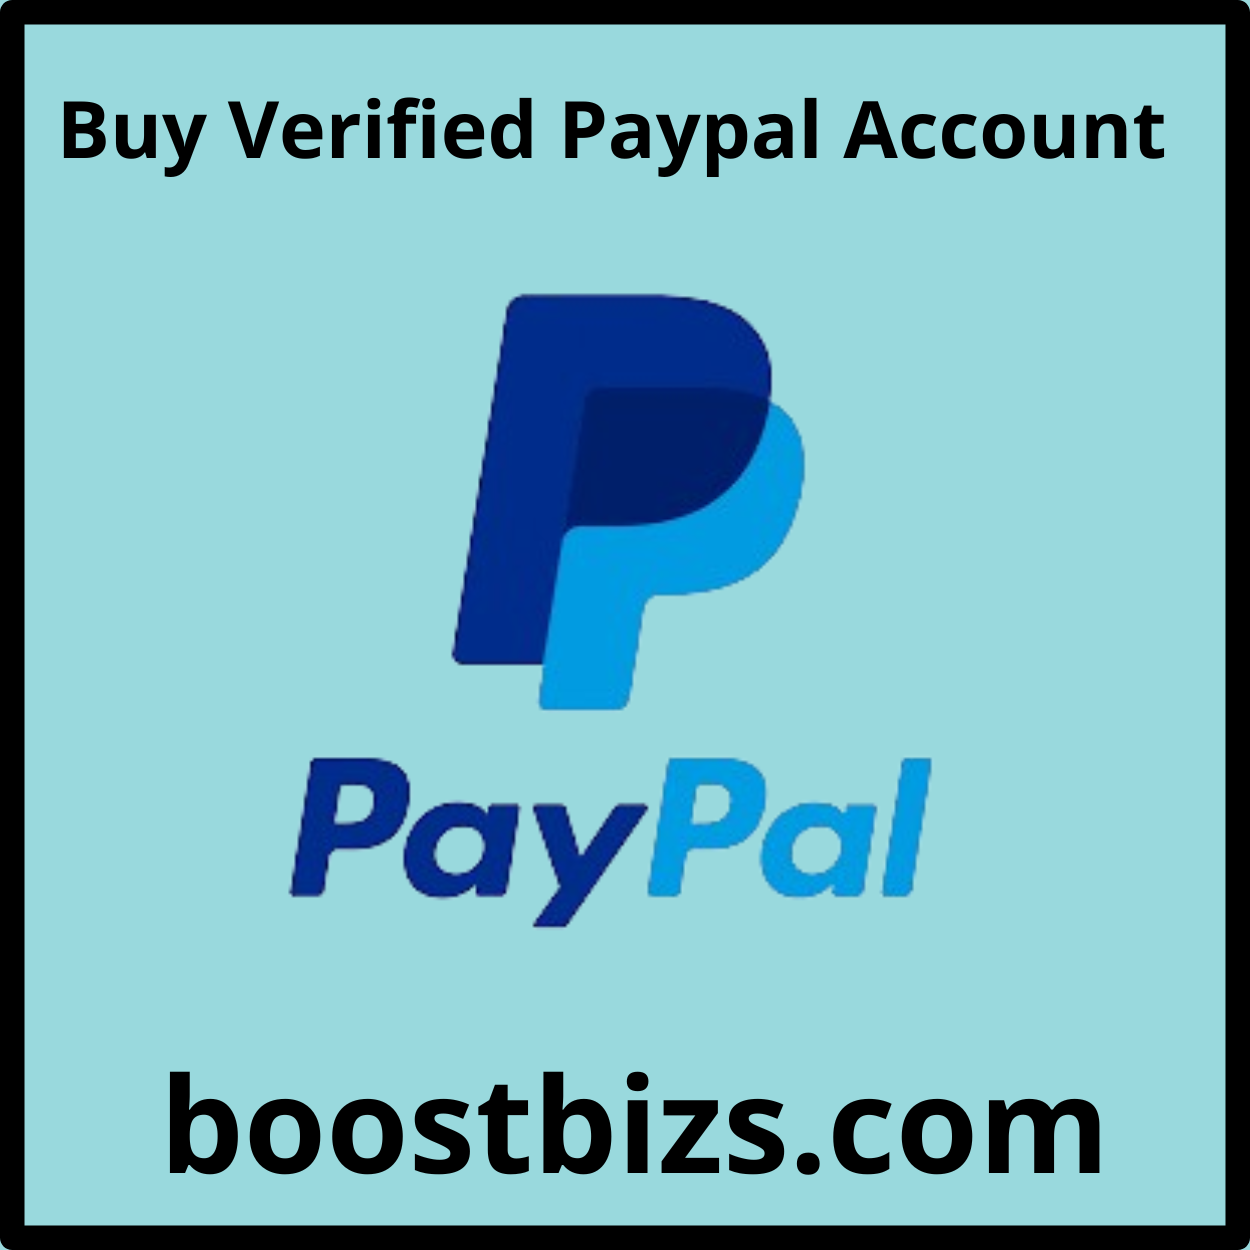 Buy Verified PayPal Accounts - BOOSTBIZS